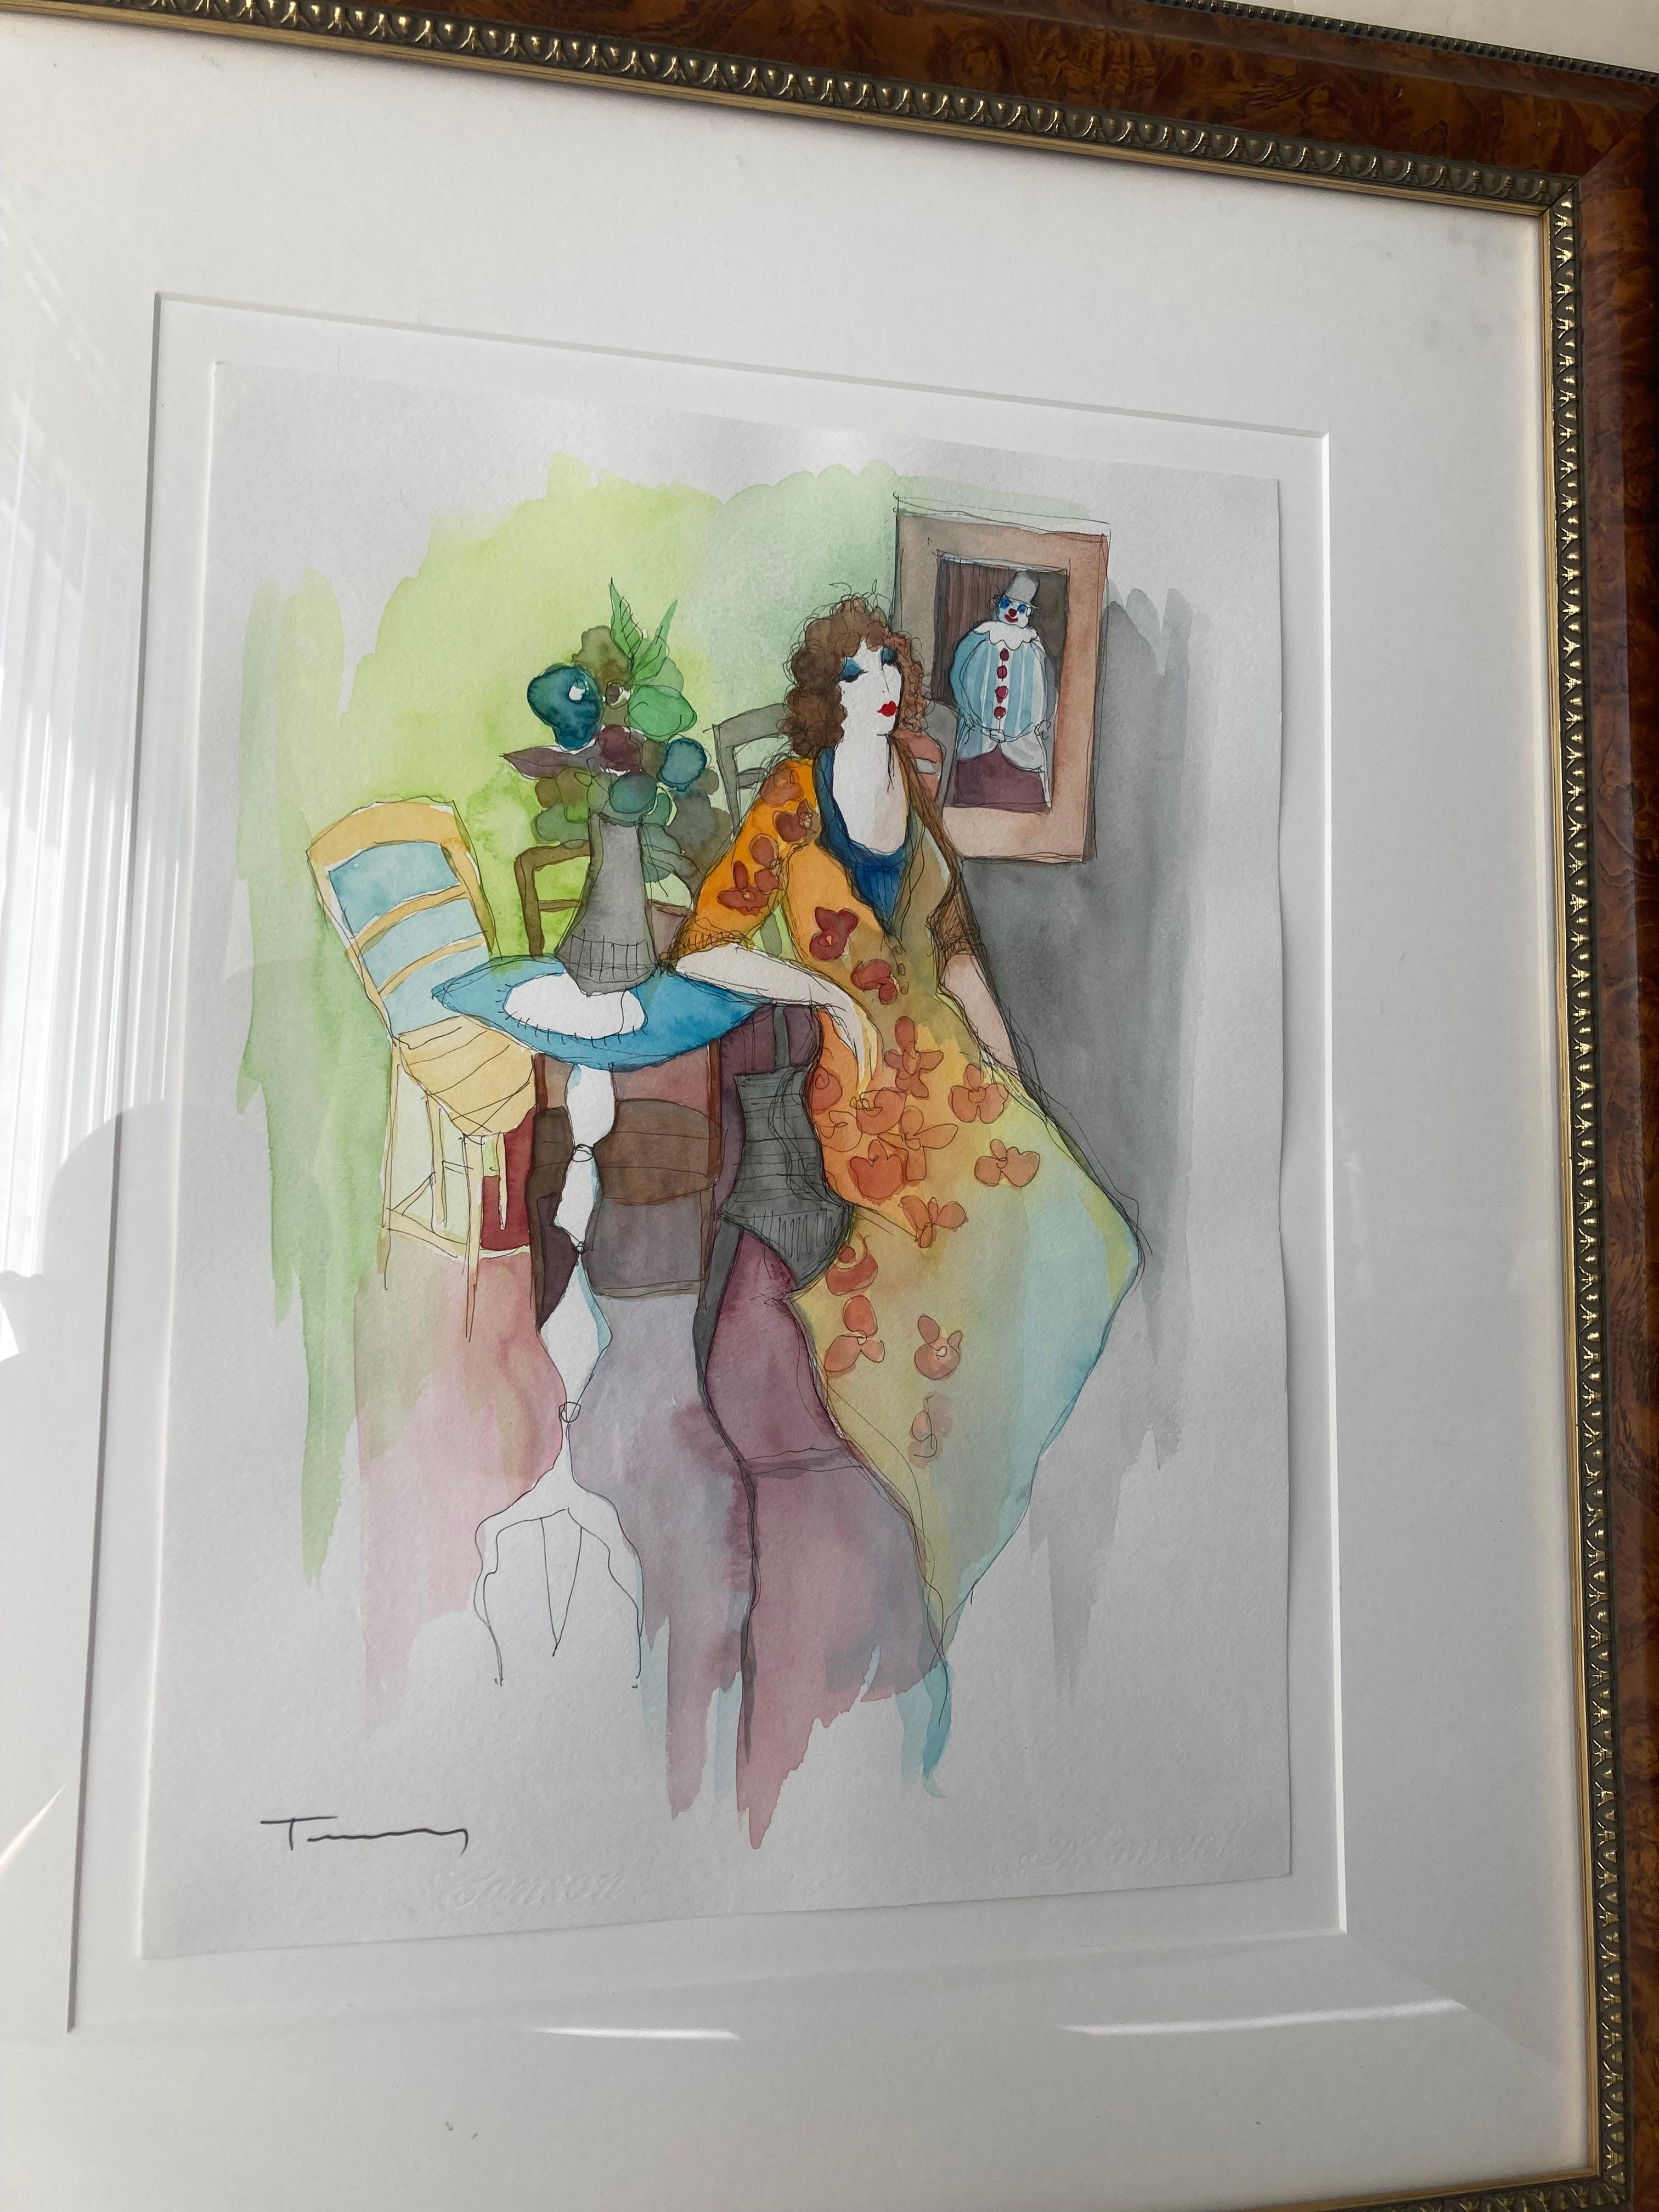 American Itzchak Tarkay Watercolor Painting, Signed, Label For Sale